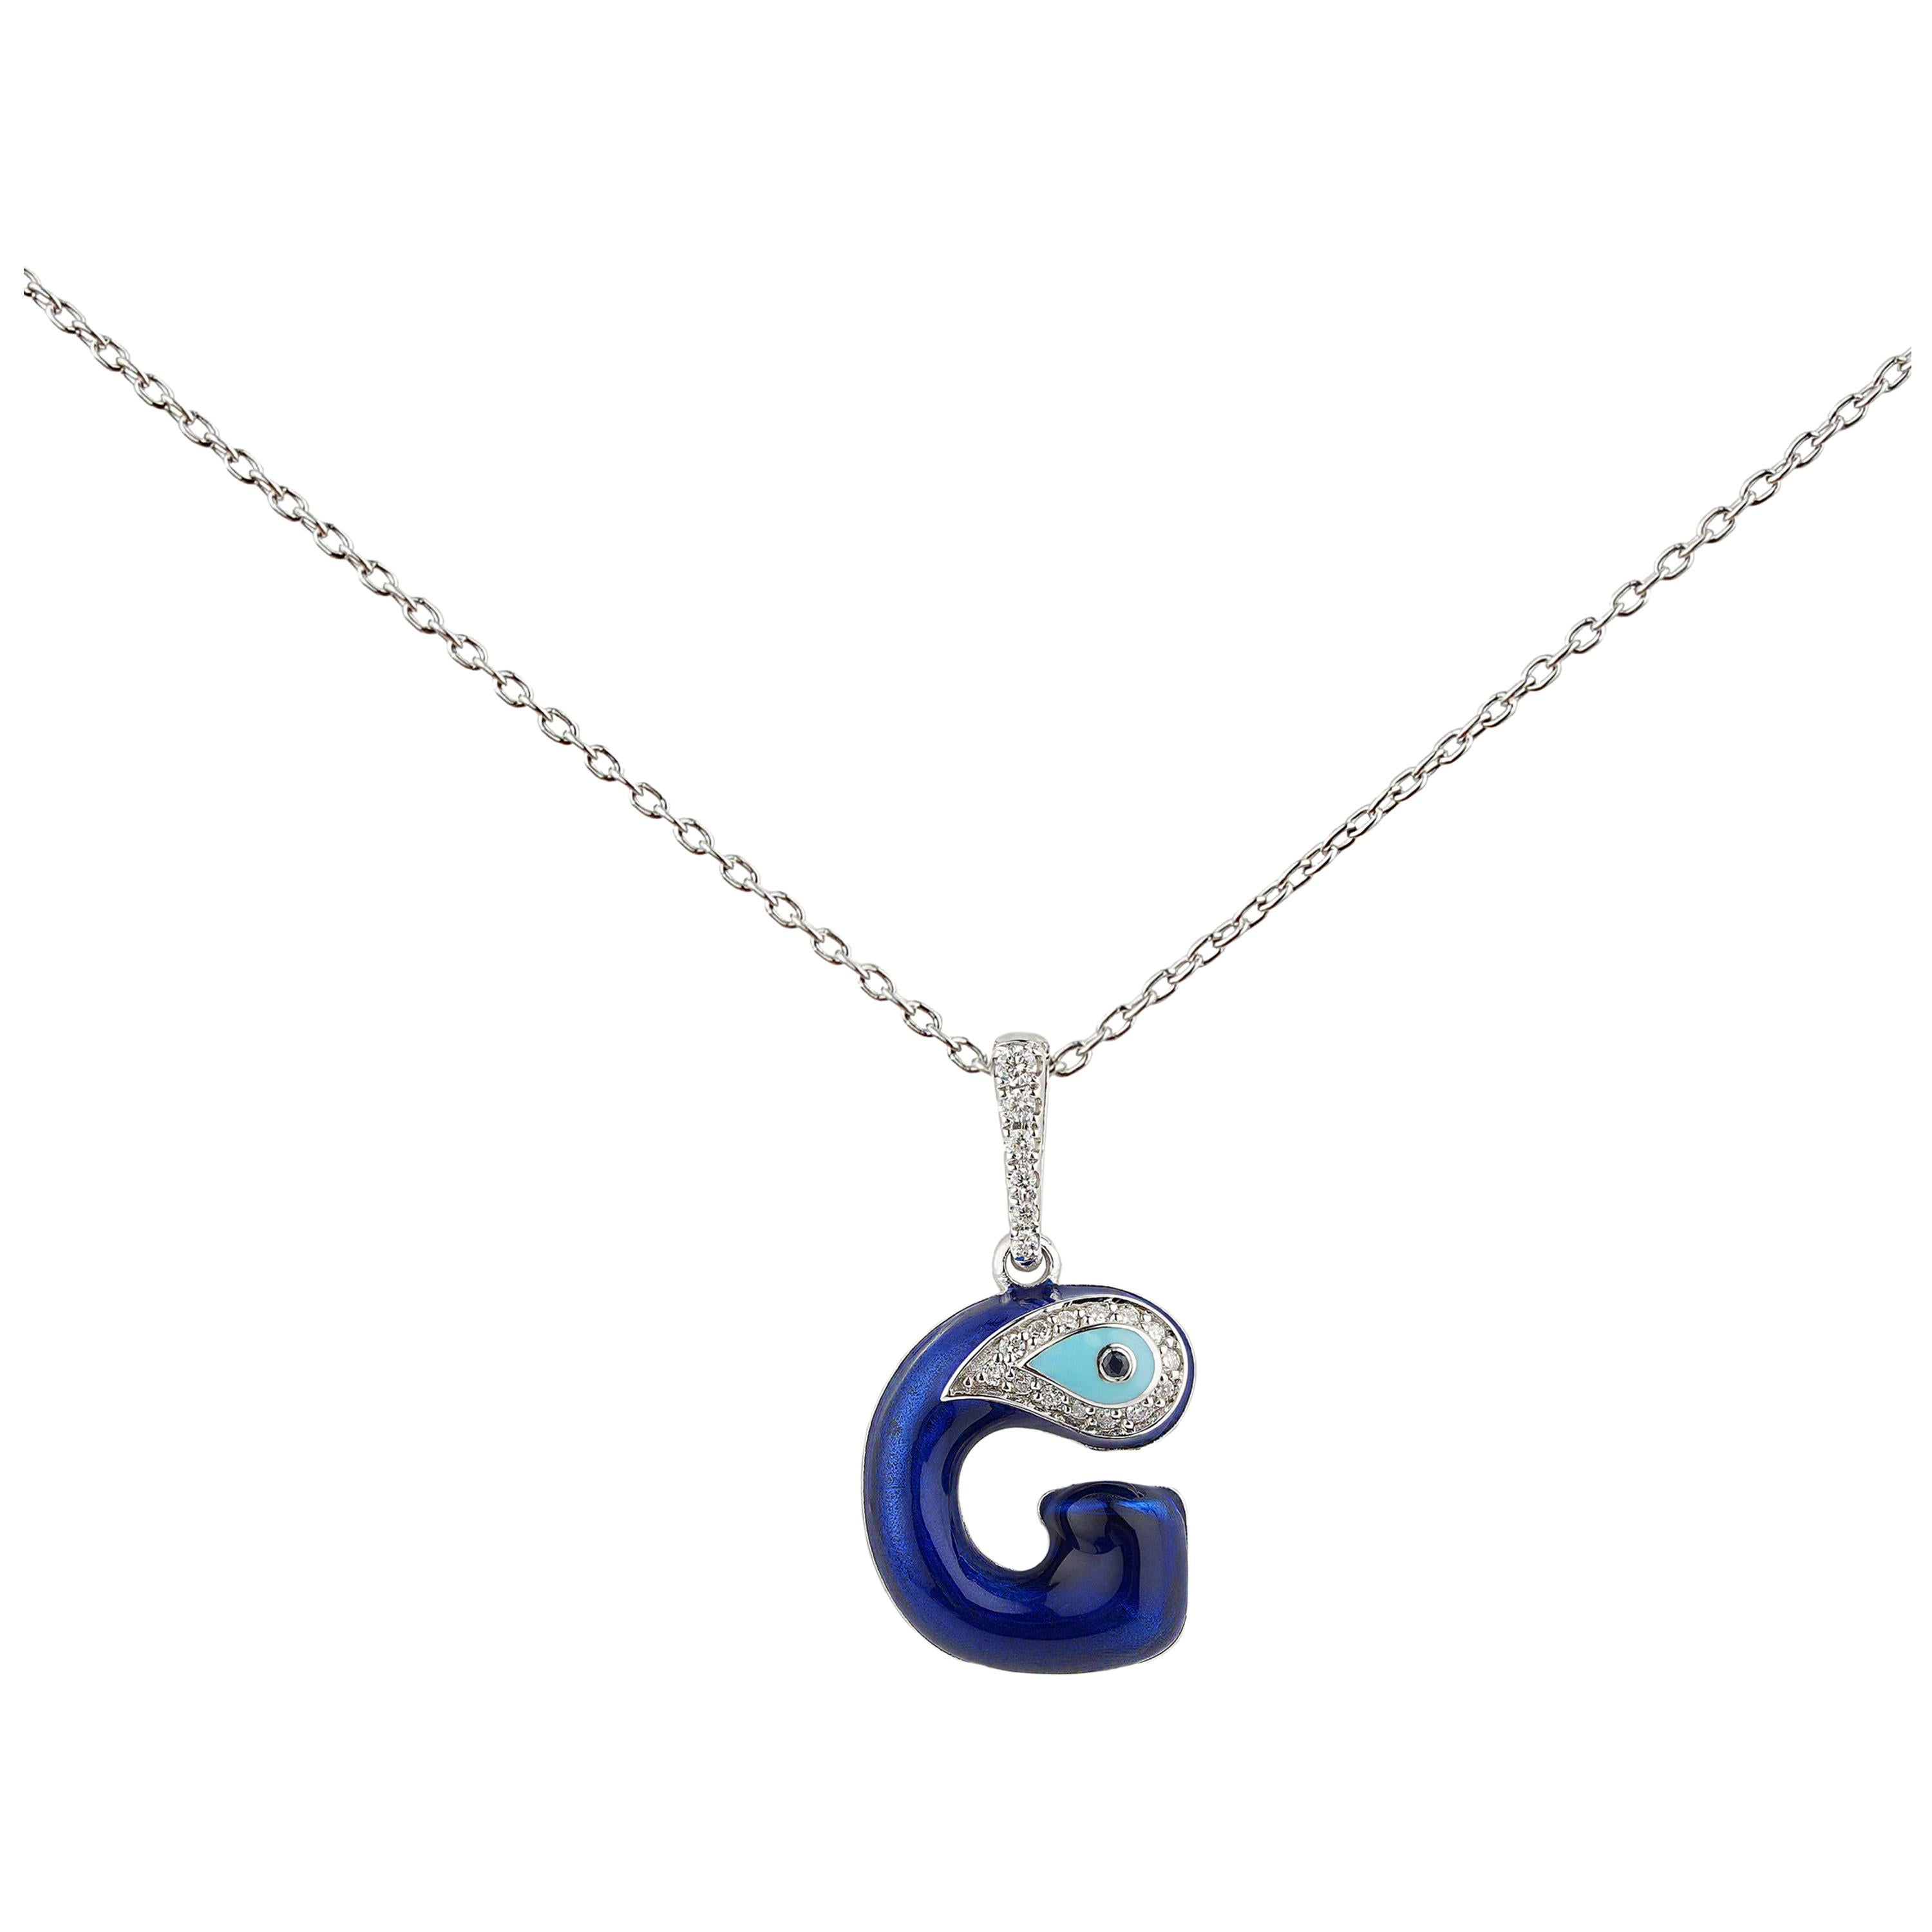 Evil Eye ID Initial Talisman Necklace from Nazarlique.
When You Wear An Evil Eye Jewelry In General, You Shield Yourself From Negativity With Its Protective Qualities. 

Discover Nazarlique Evil Eye ID Collection Jewelry Designed and Handcrafted in